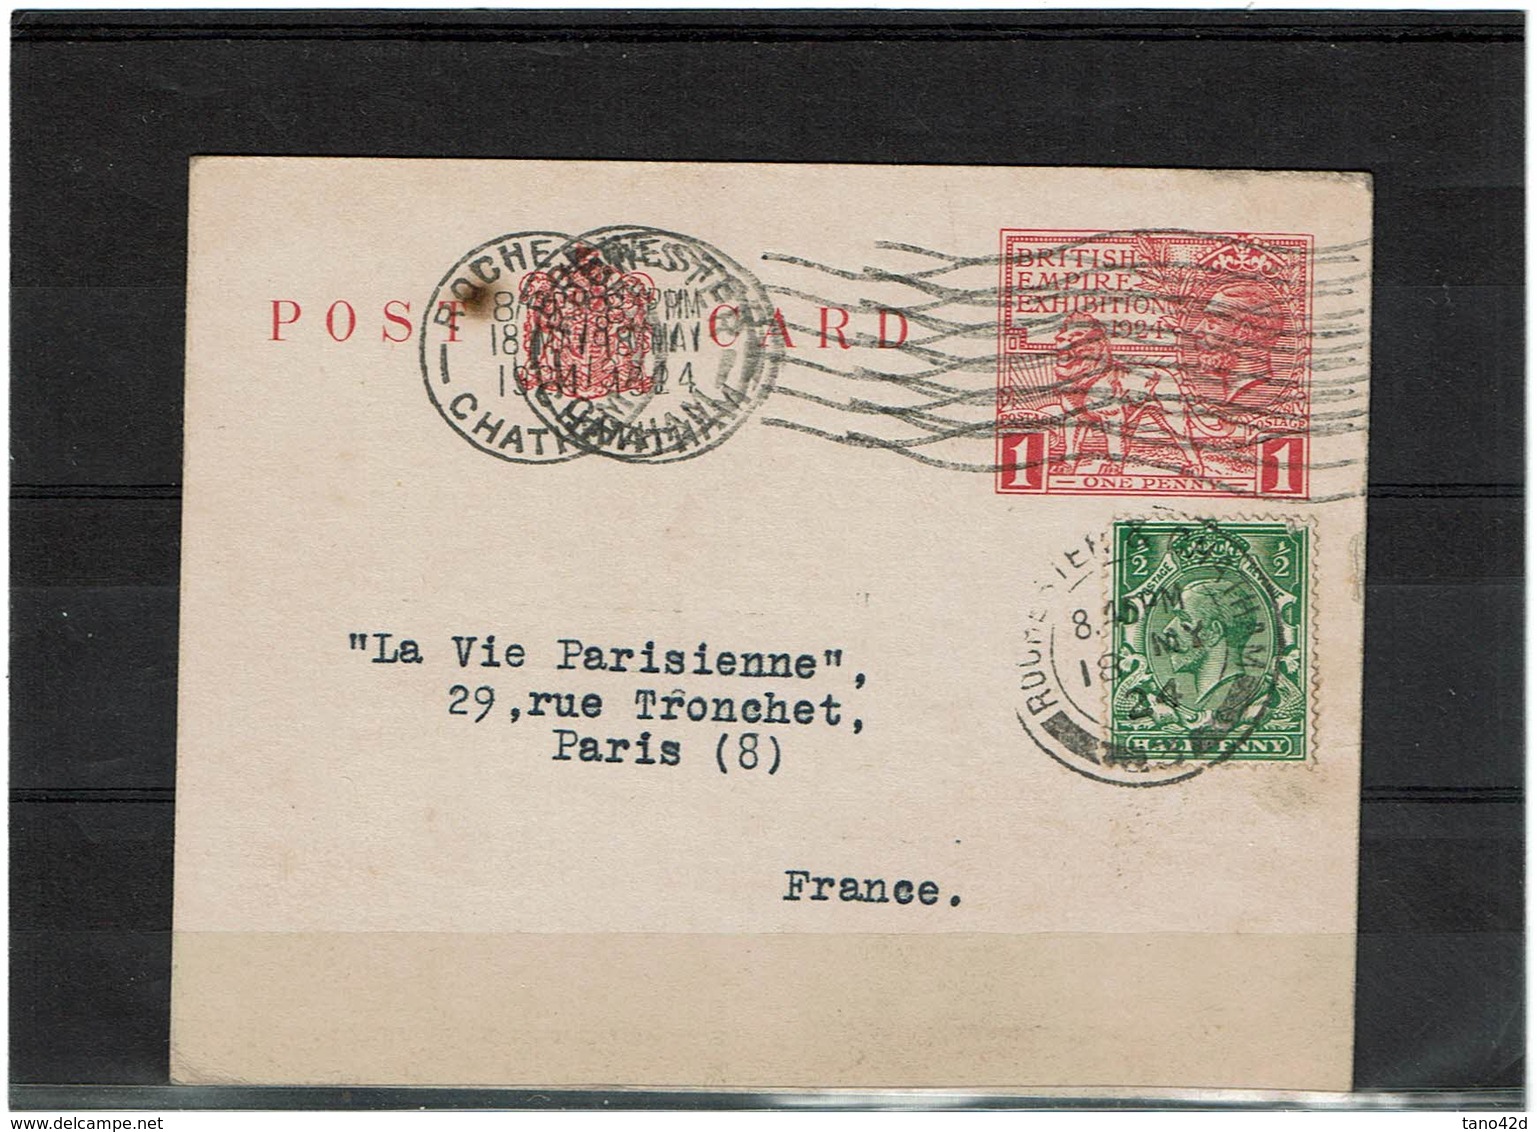 LMM14 - GRANDE BRETAGNE EP CP ROCHESTER / PARIS 18/5/1924 - Stamped Stationery, Airletters & Aerogrammes